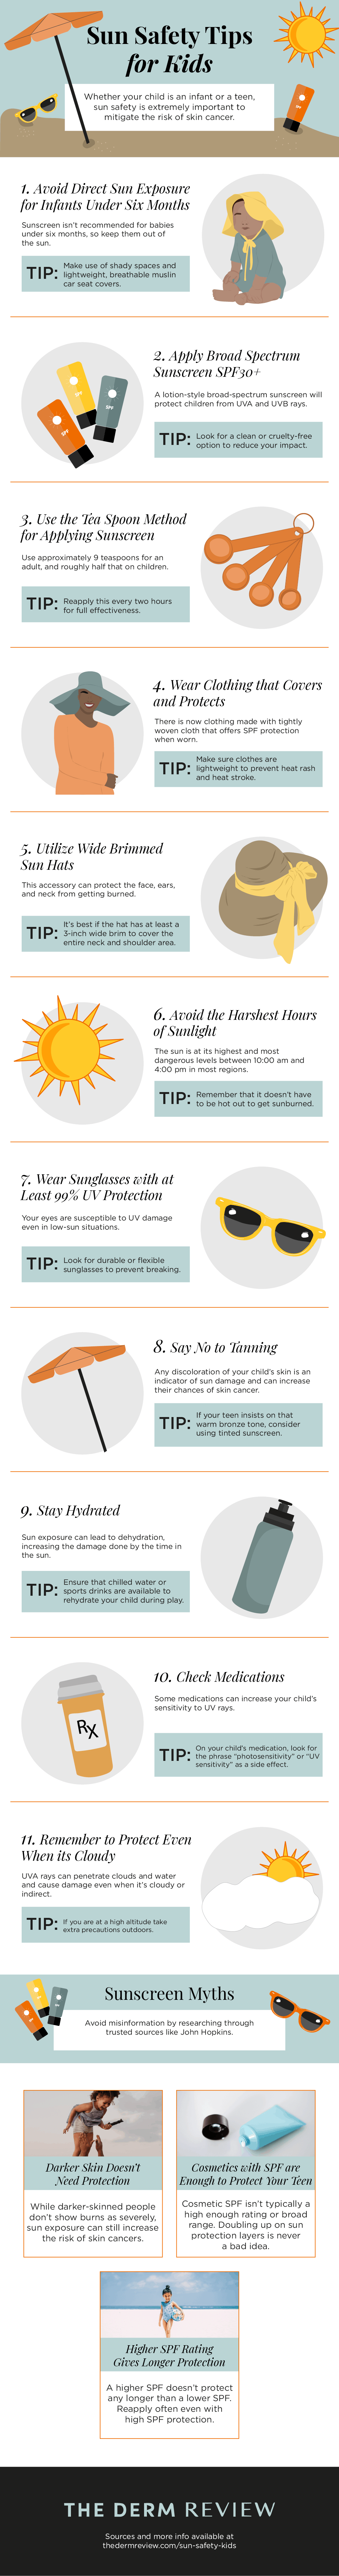 sun safety tips for kids